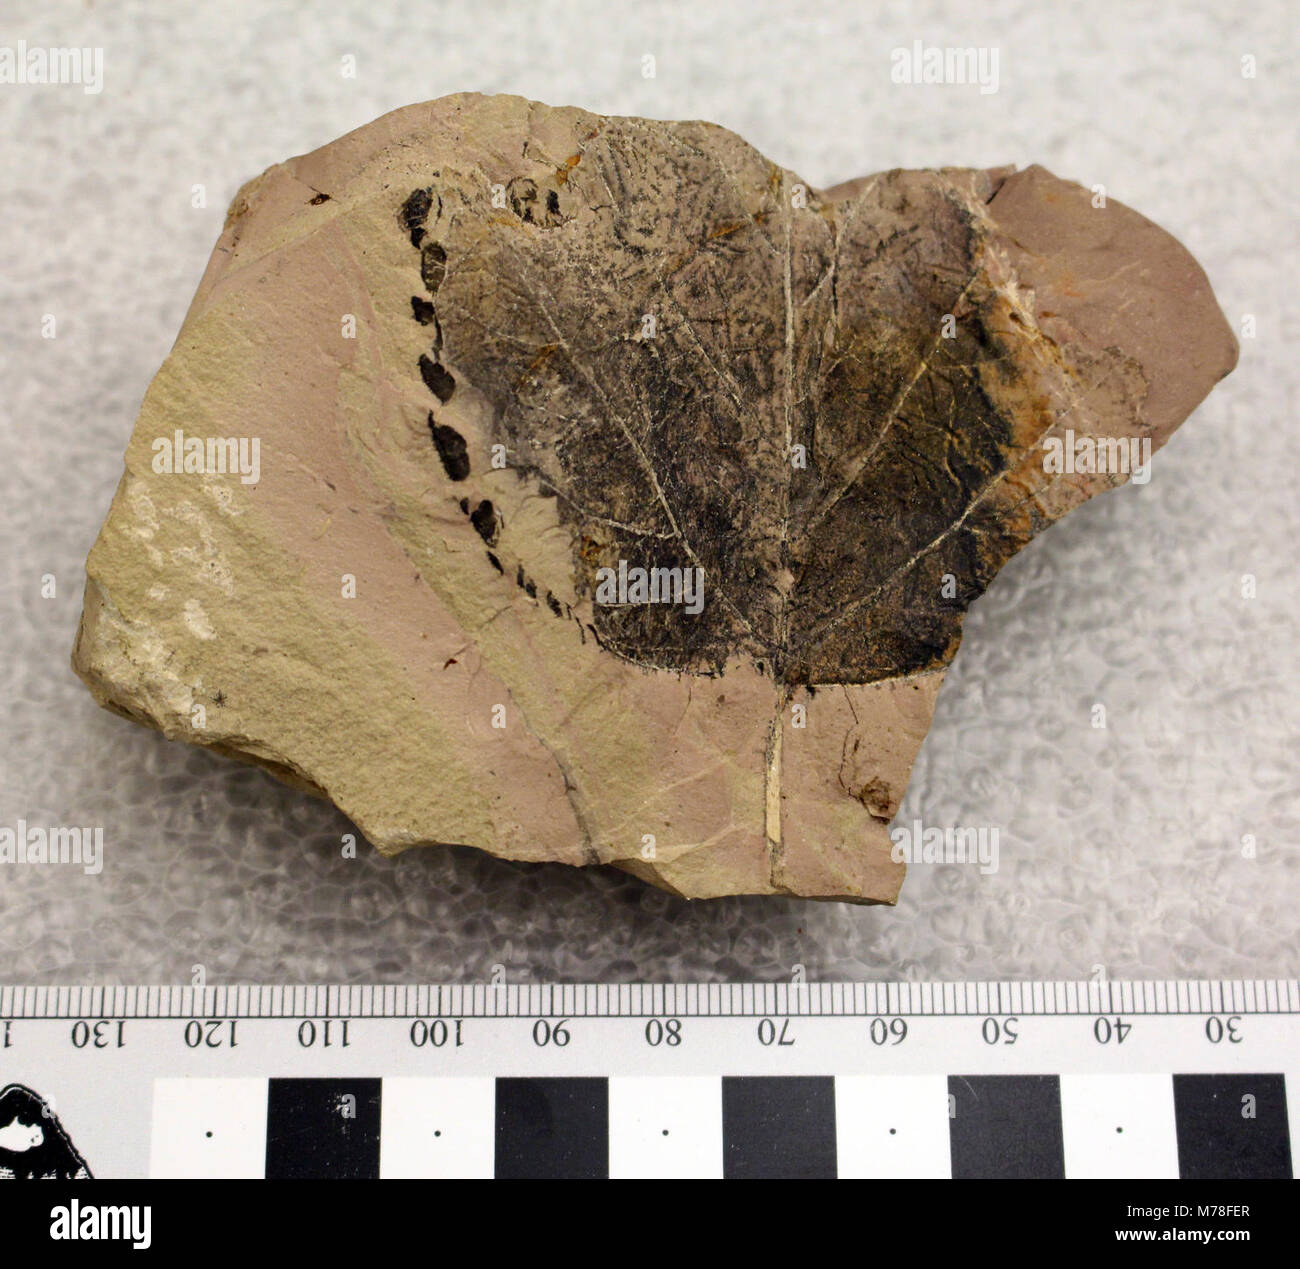 YELL. YELL 2323: This well preserved leaf is from an angiosperm. Fossilized leaves are very common within Yellowstone National Park.   Collecting any natural resources, including rocks and fossils, is illegal in Yellowstone. Stock Photo